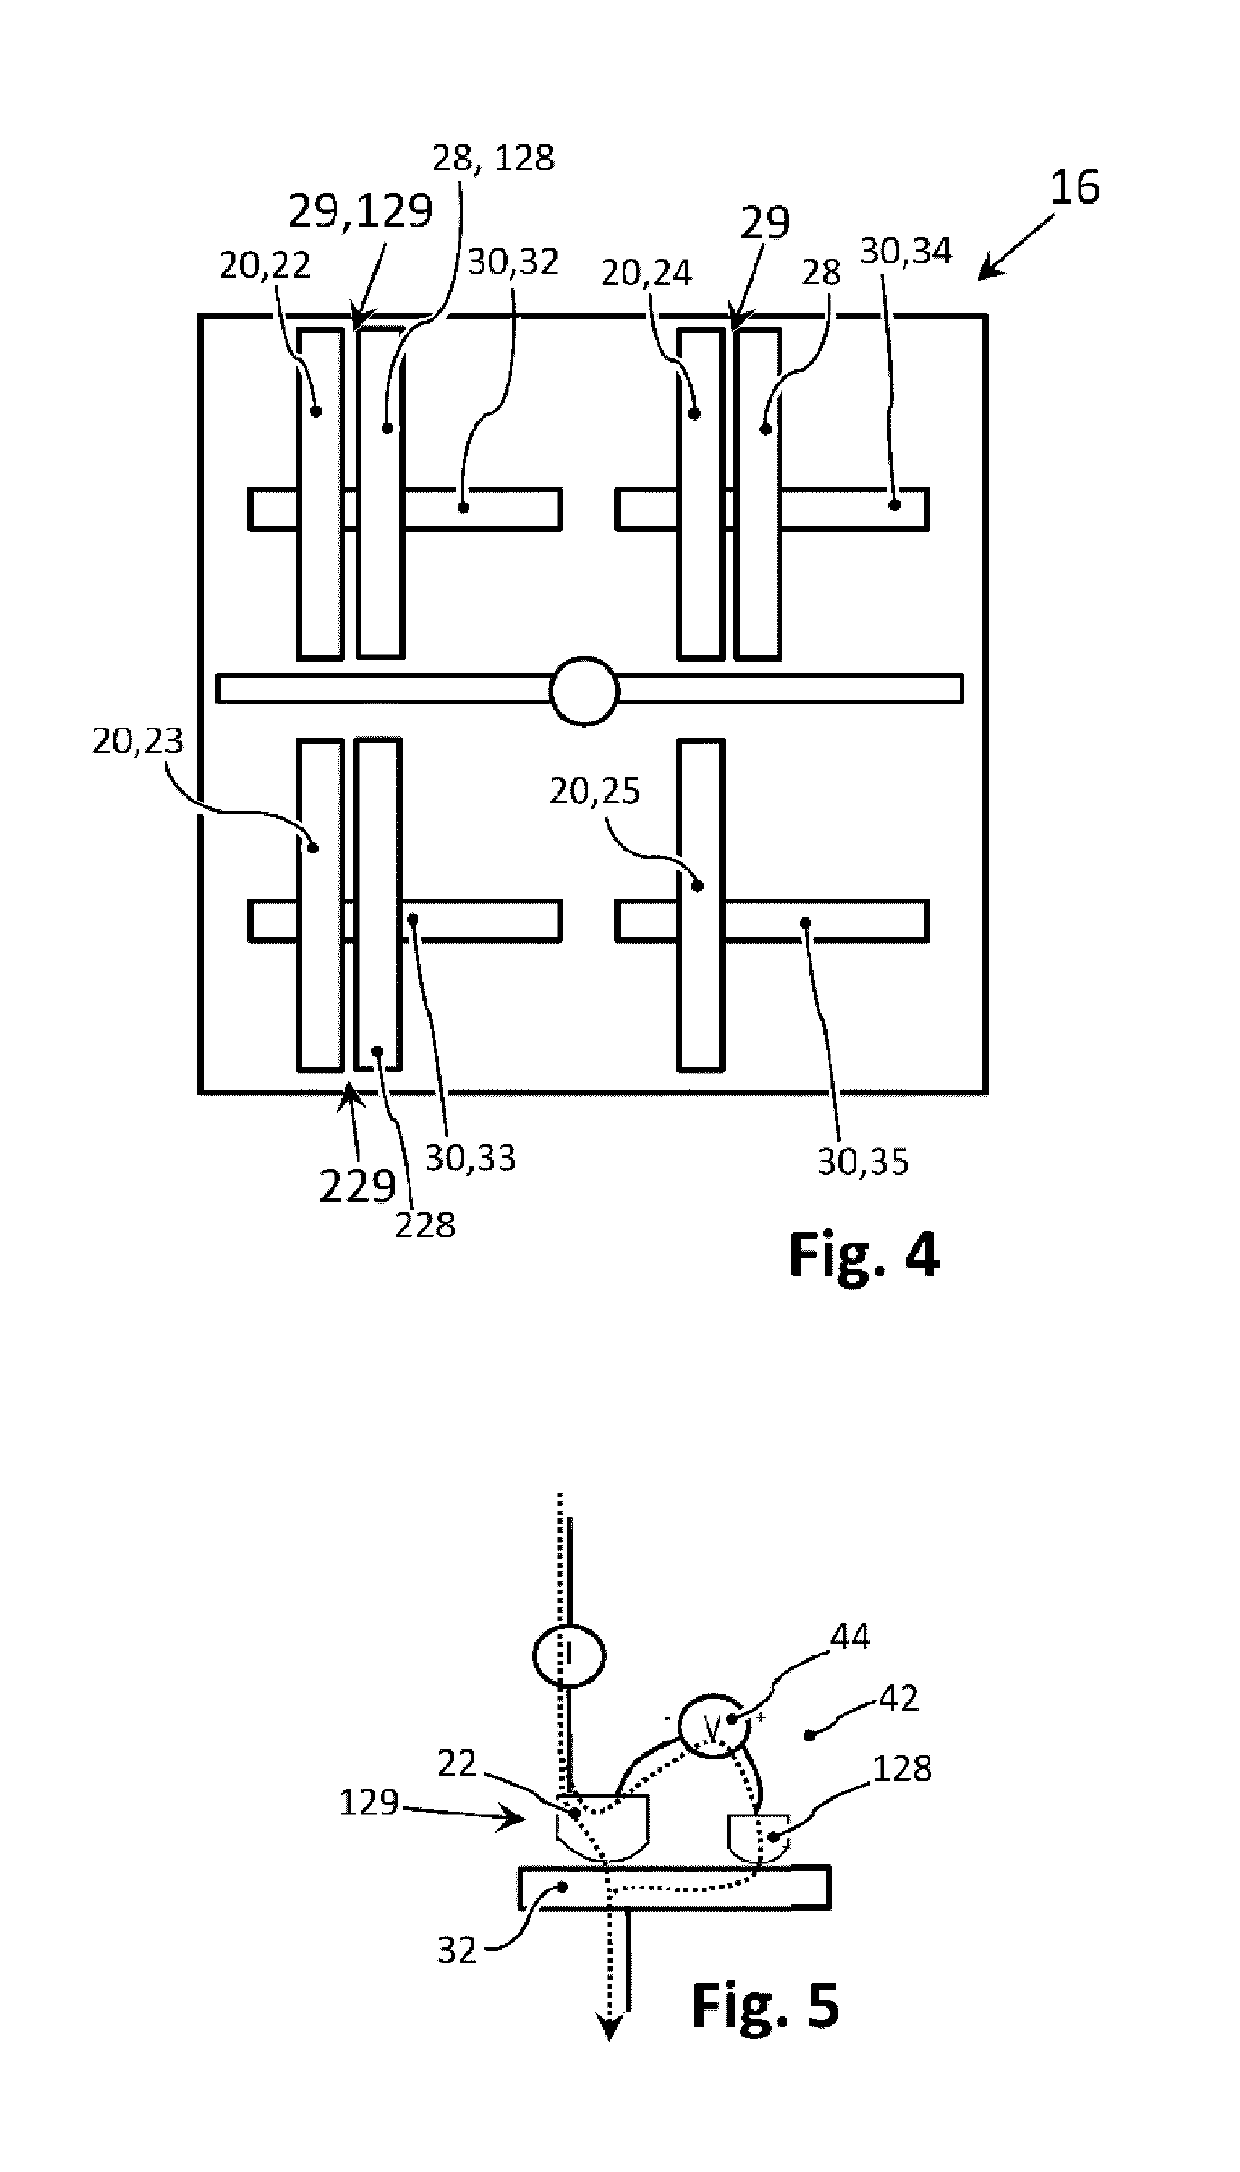 Device for charging an electric vehicle and a method for verifying the contact between a device for charging an electric vehicle and the electric vehicle